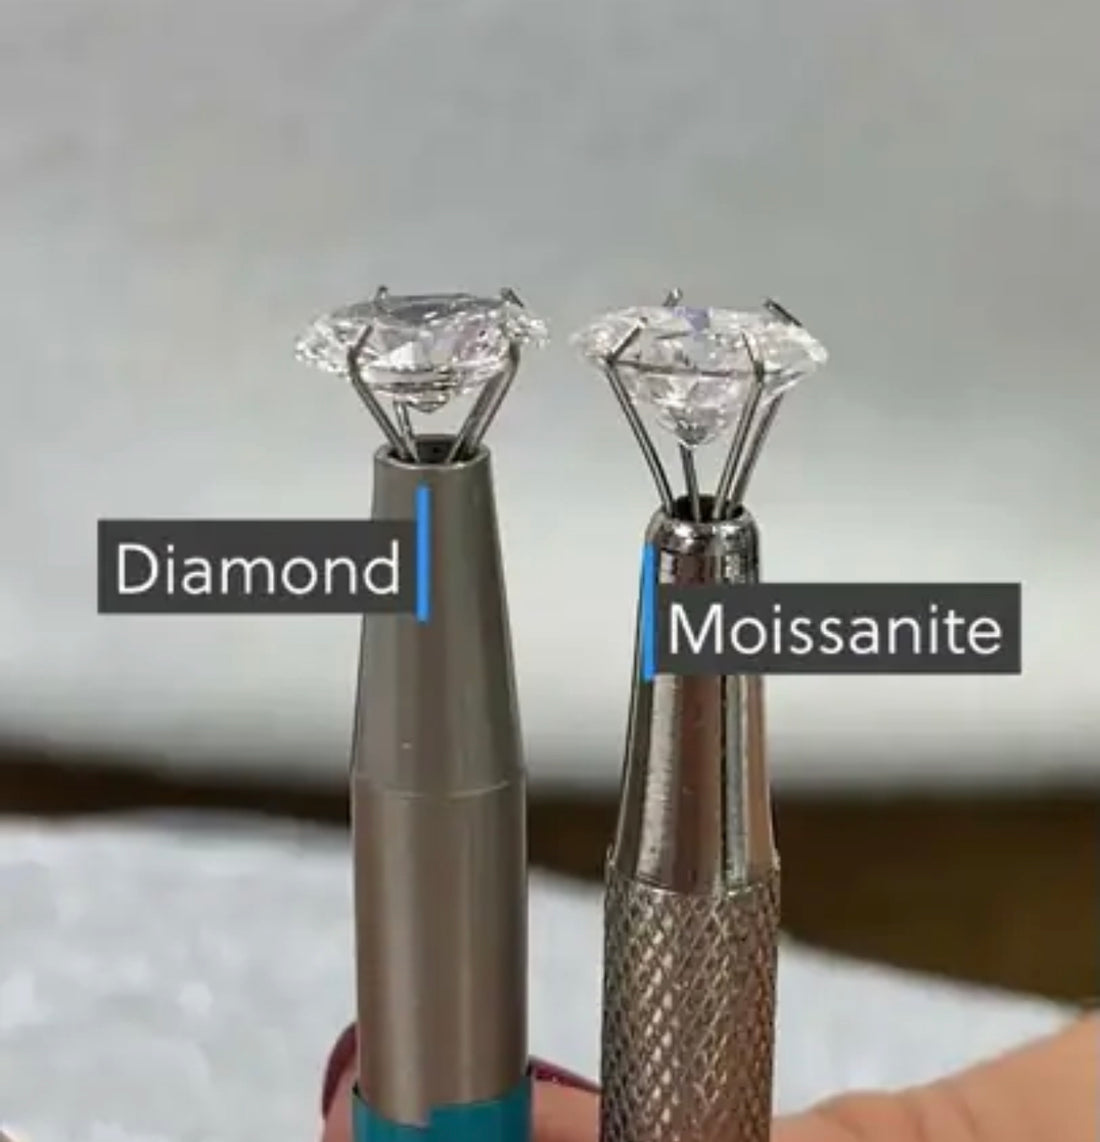 A Consumer's Guide to Natural Diamonds vs. Moissanite: Price and Appearance